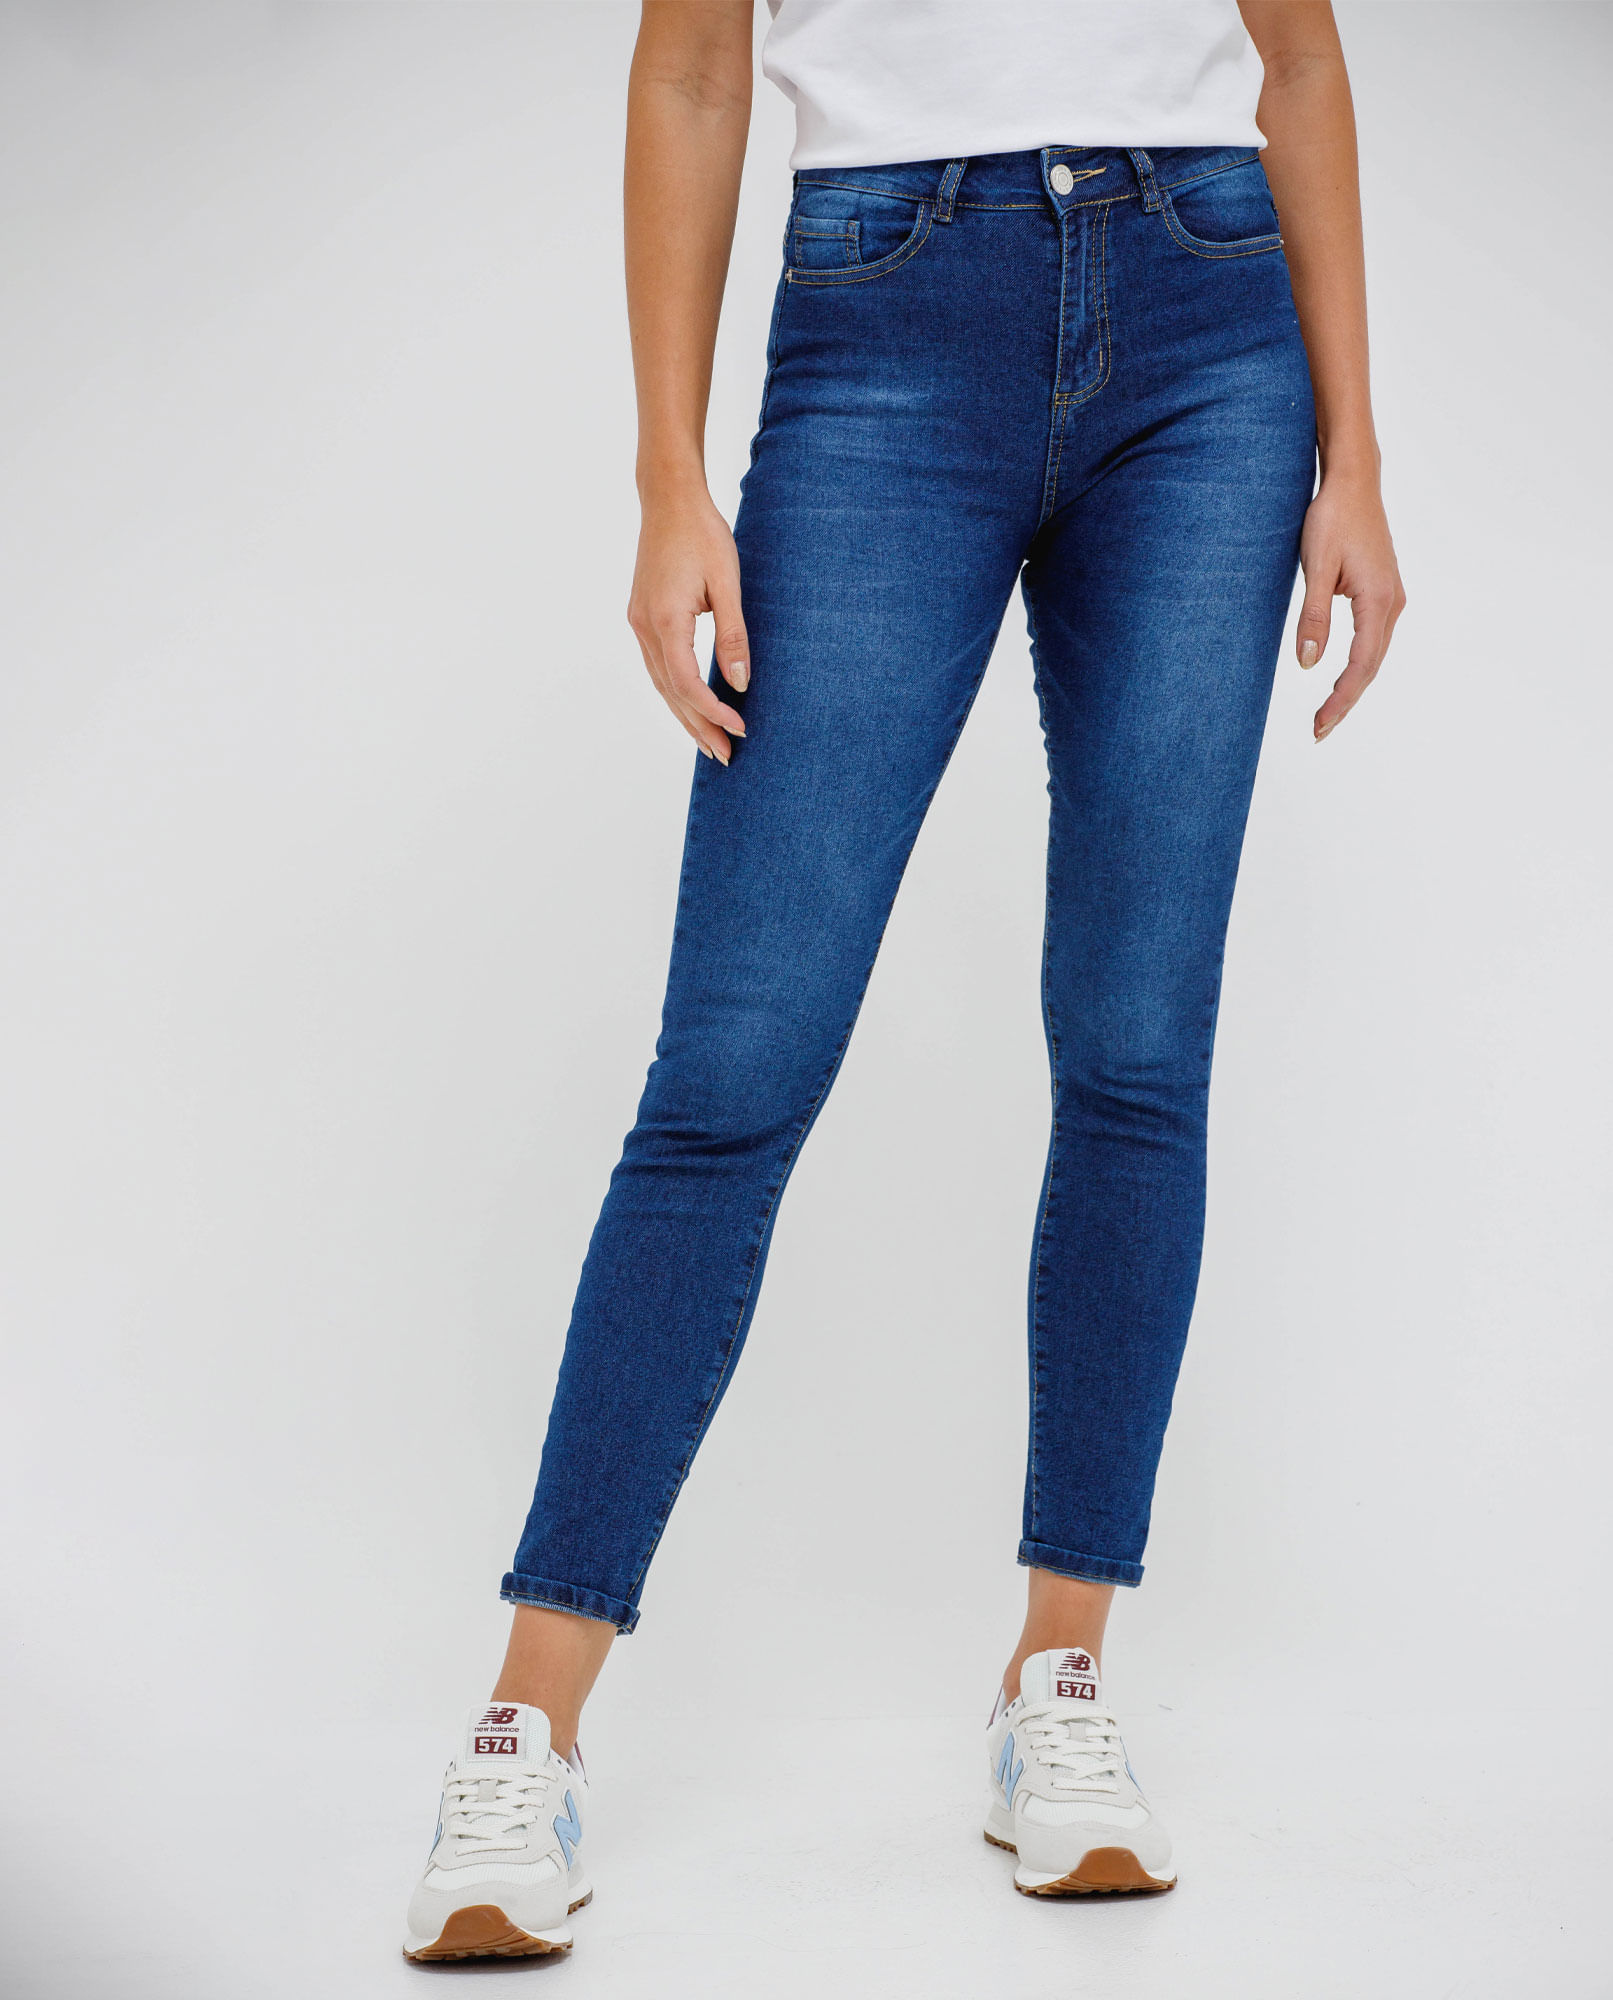 JEANS BÁSICO PUSH UP MUJER GRIS OSCURO